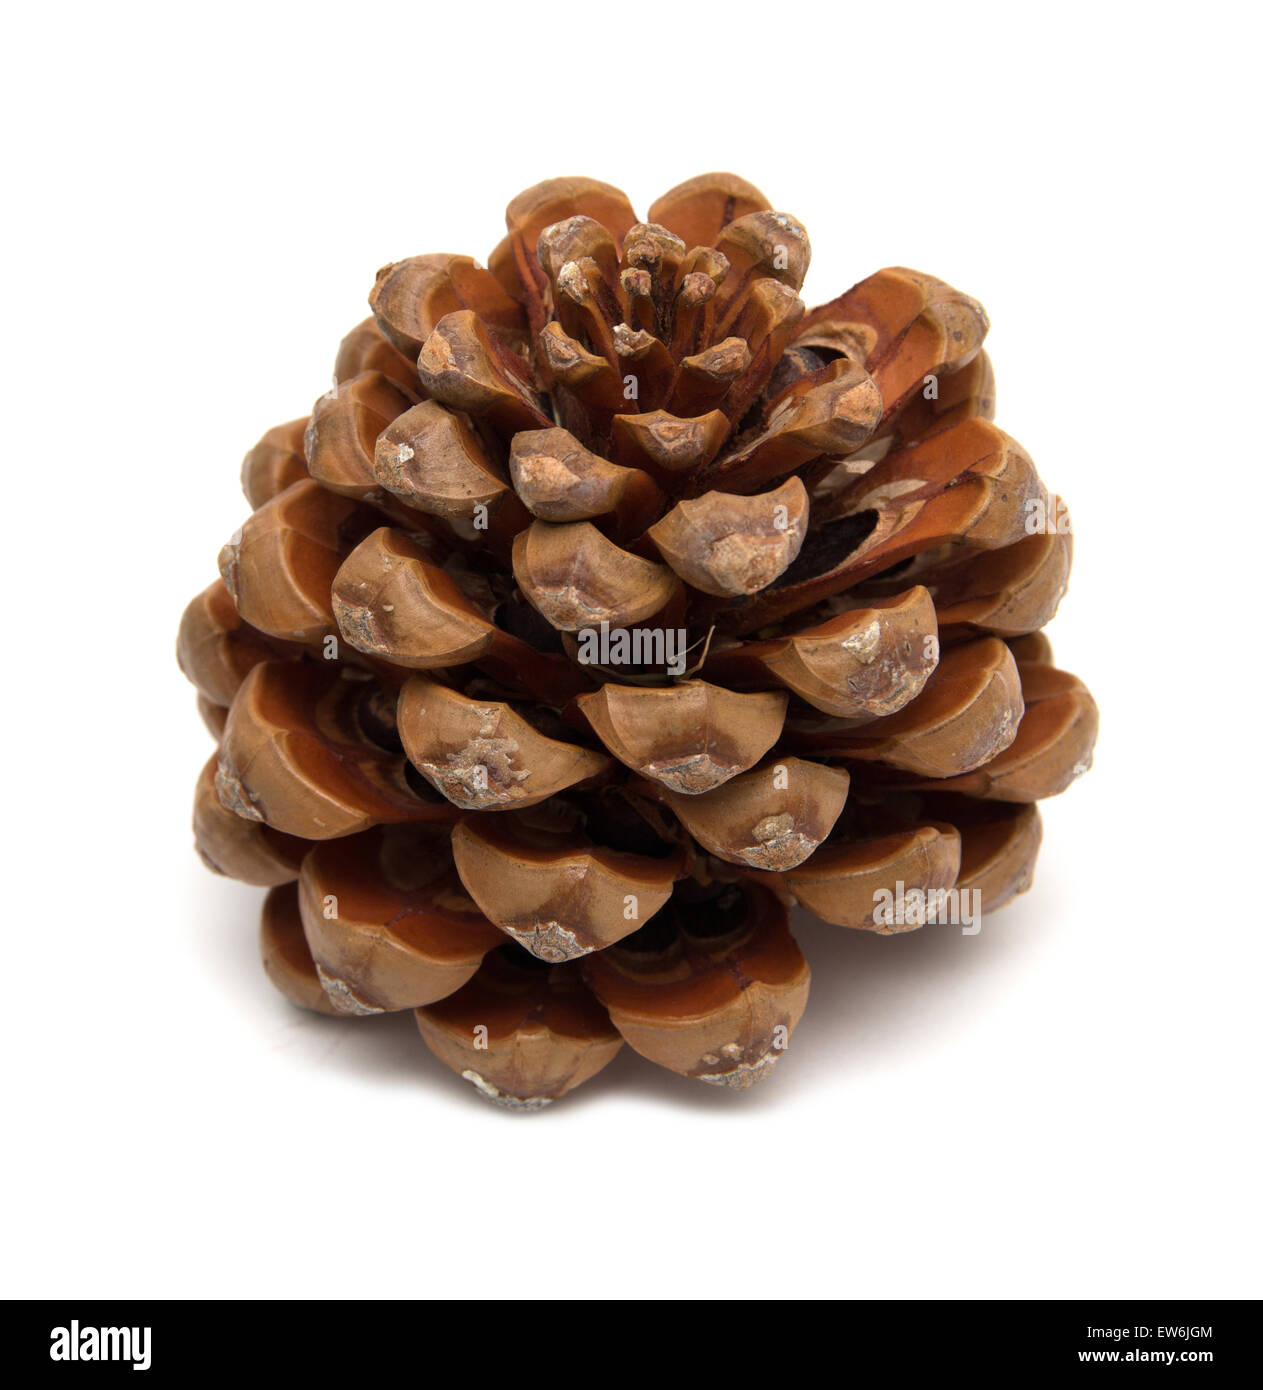 cone of stone pine, Pinus pinea, with some of the nuts still in, isolated on white background Stock Photo